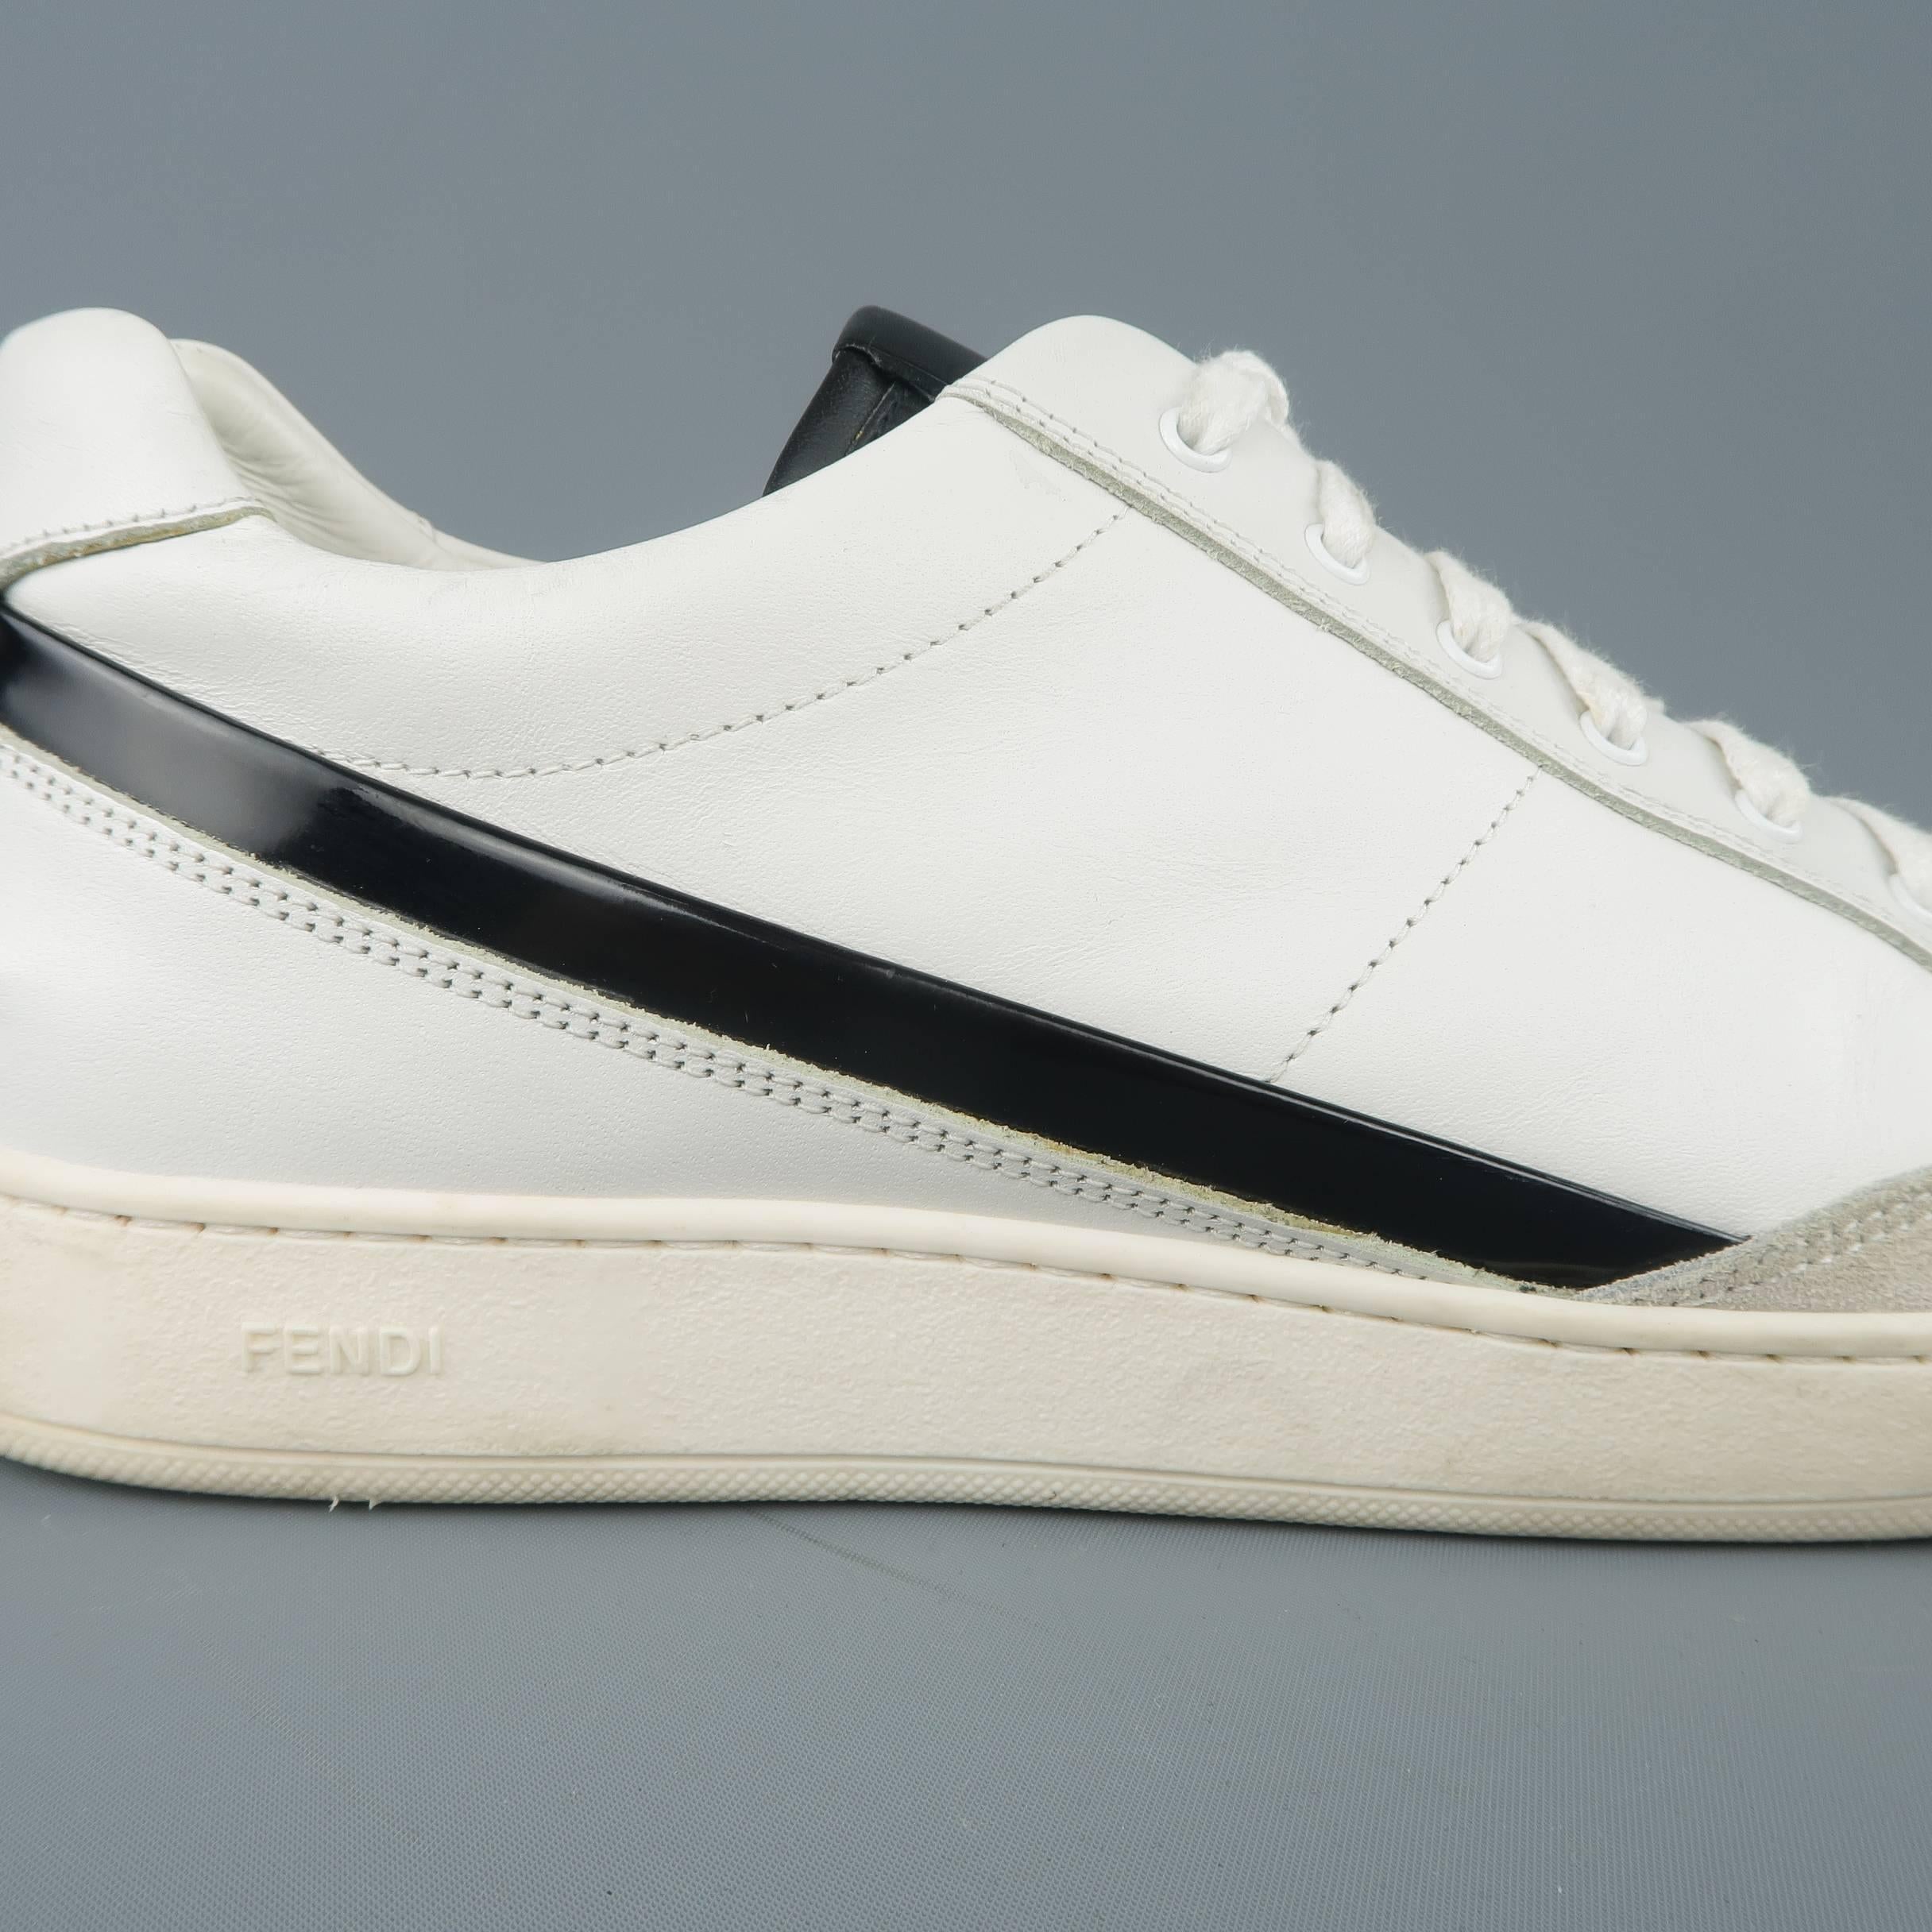 FENDI sneakers in white smooth leather with a lace up front, black tongue, grey suede detail, and black patent leather stripe. Wear throughout. Made in Italy.
 
Fair Pre-Owned Condition.
Marked: UK 7
 
Outsole: 11.5 x 4 in.
